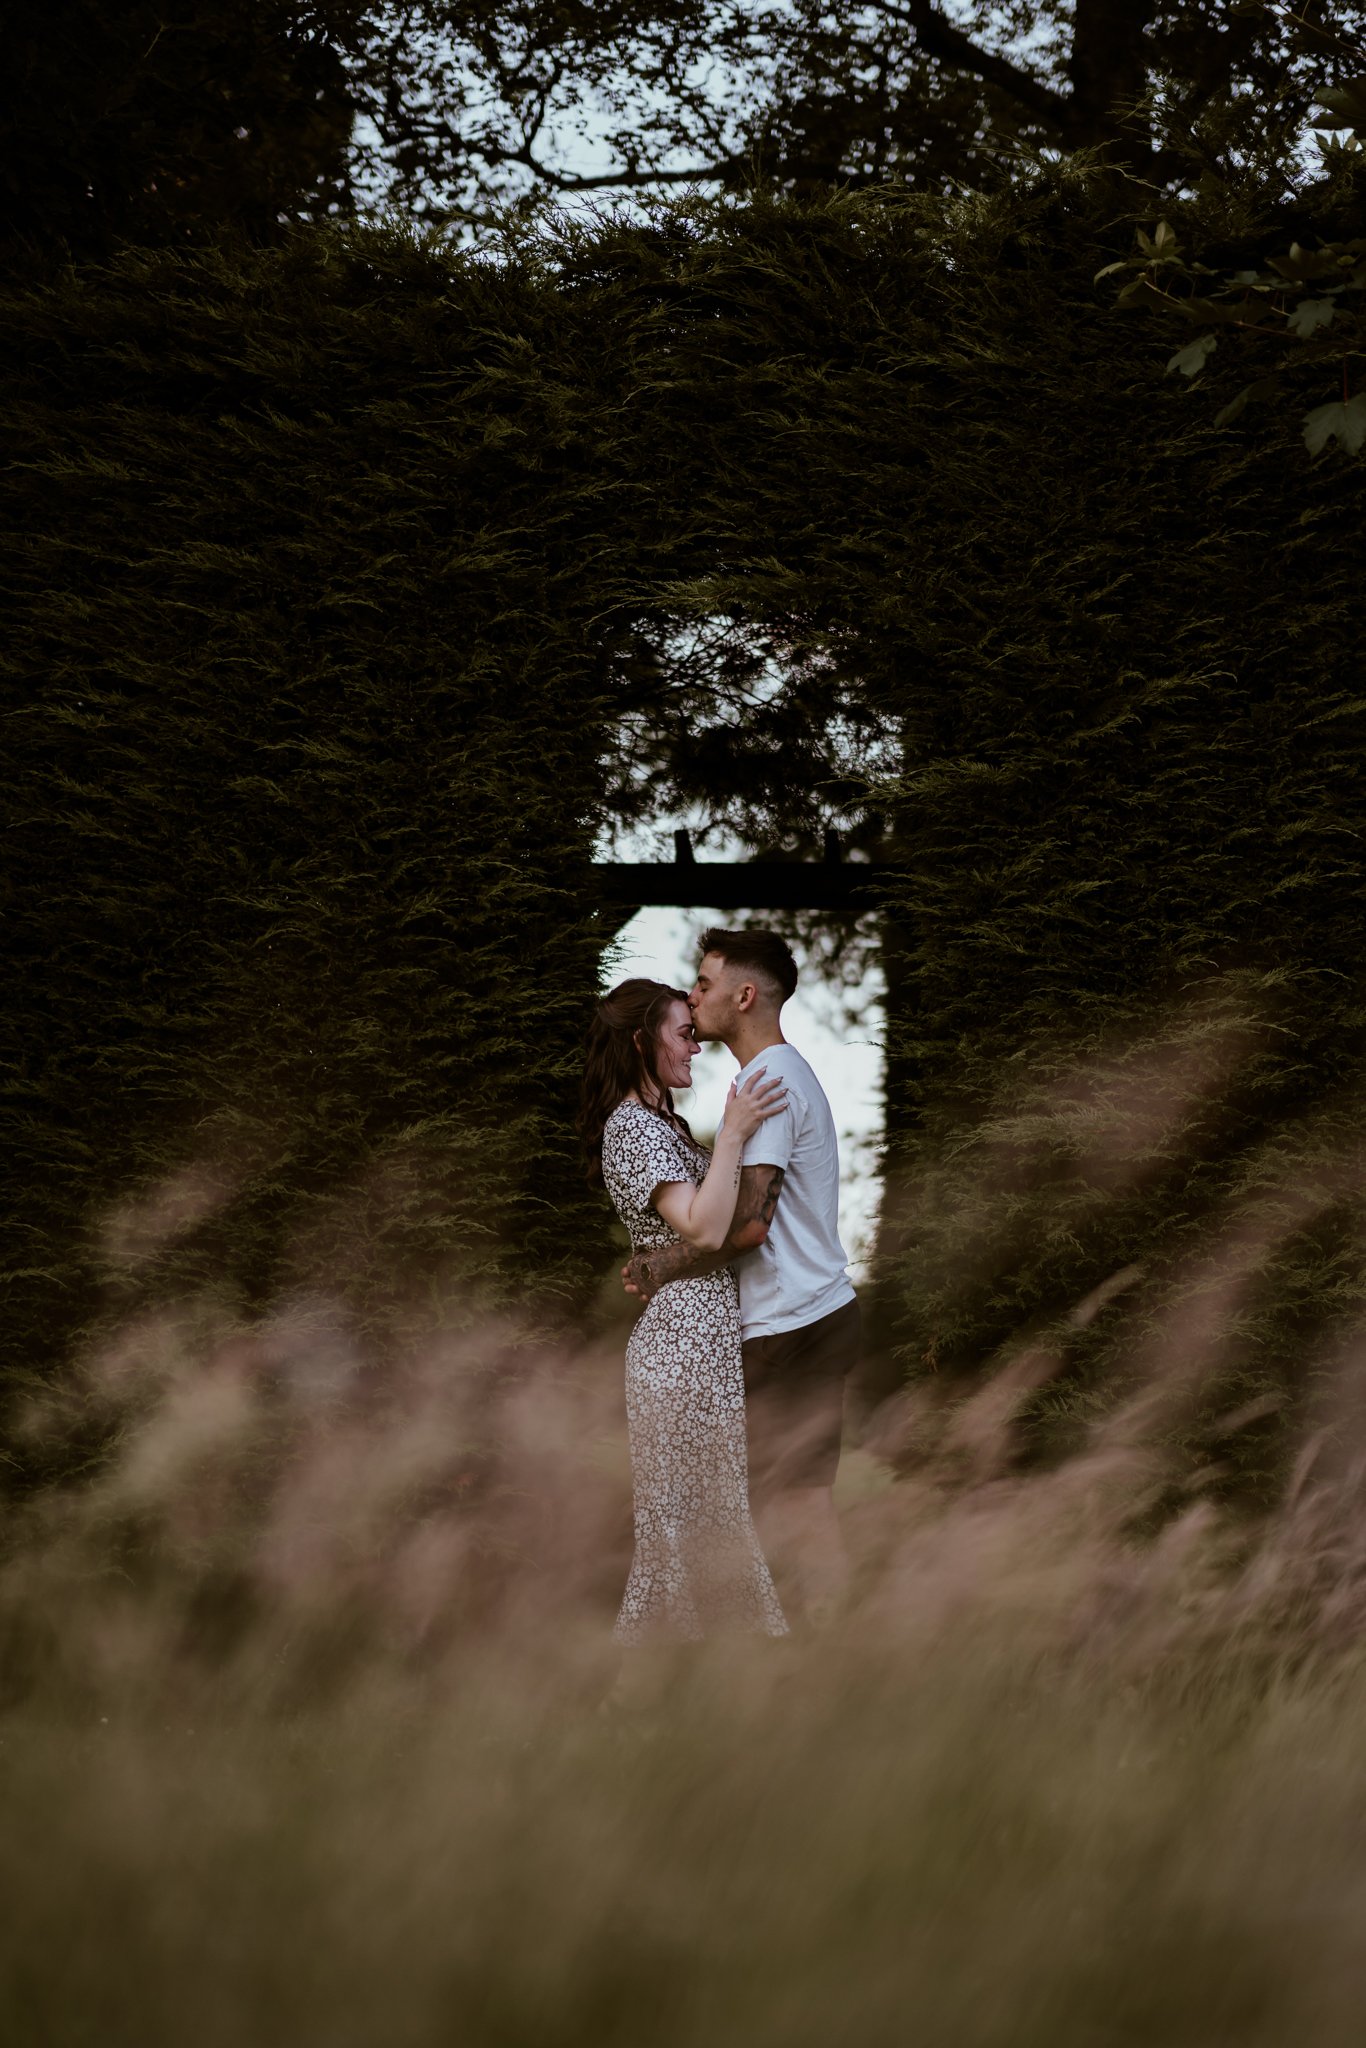 Angus Scotland Engagement and Wedding Photographer - Emily and Gabriel - Adventure Couple Session60.jpg